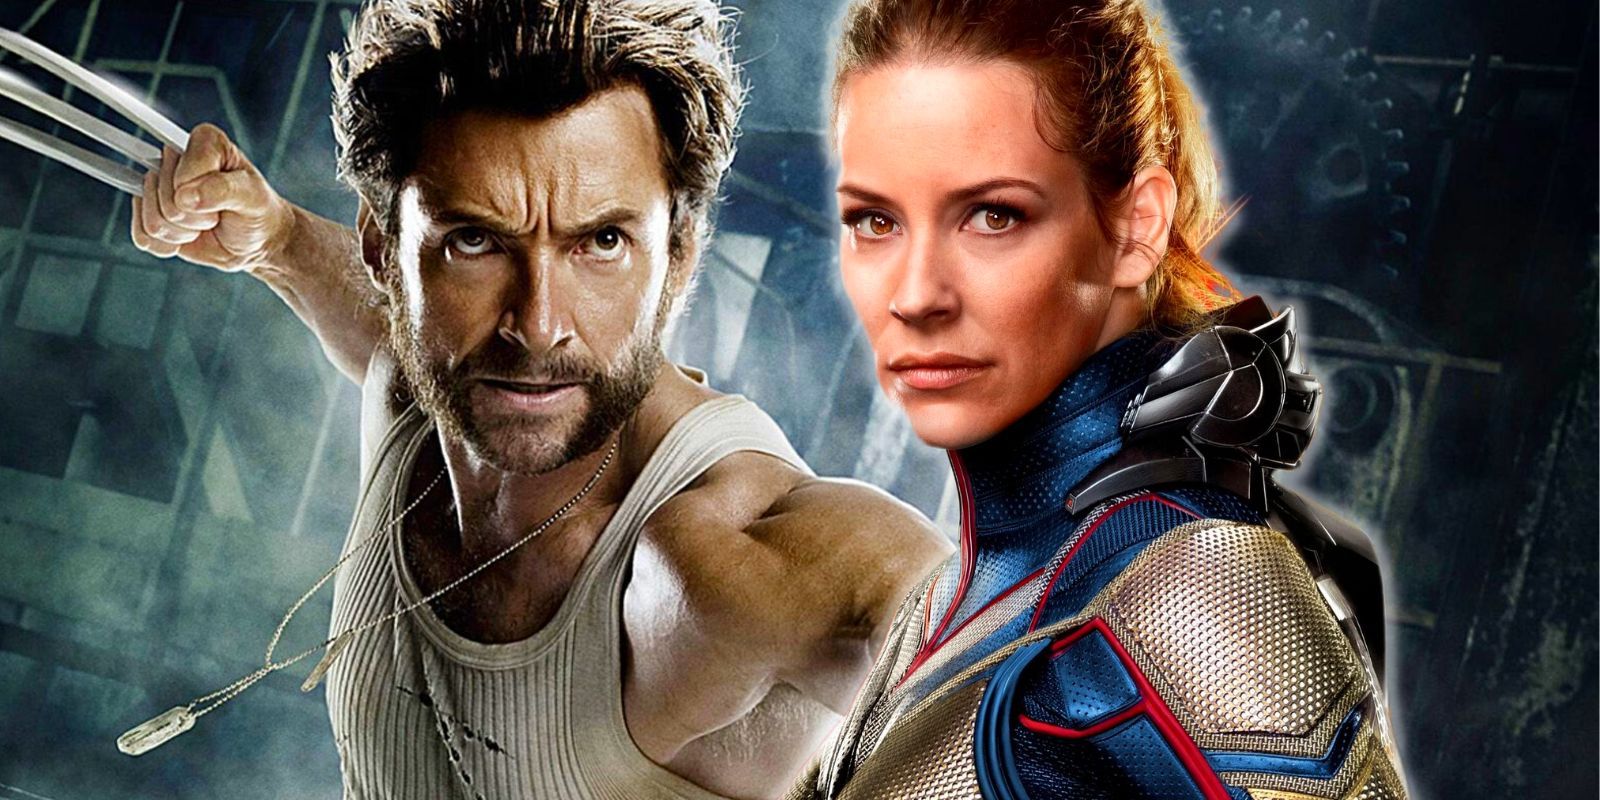 Hugh Jackman's Wolverine flexes his claws alongside Evangeline Lilly's Wasp